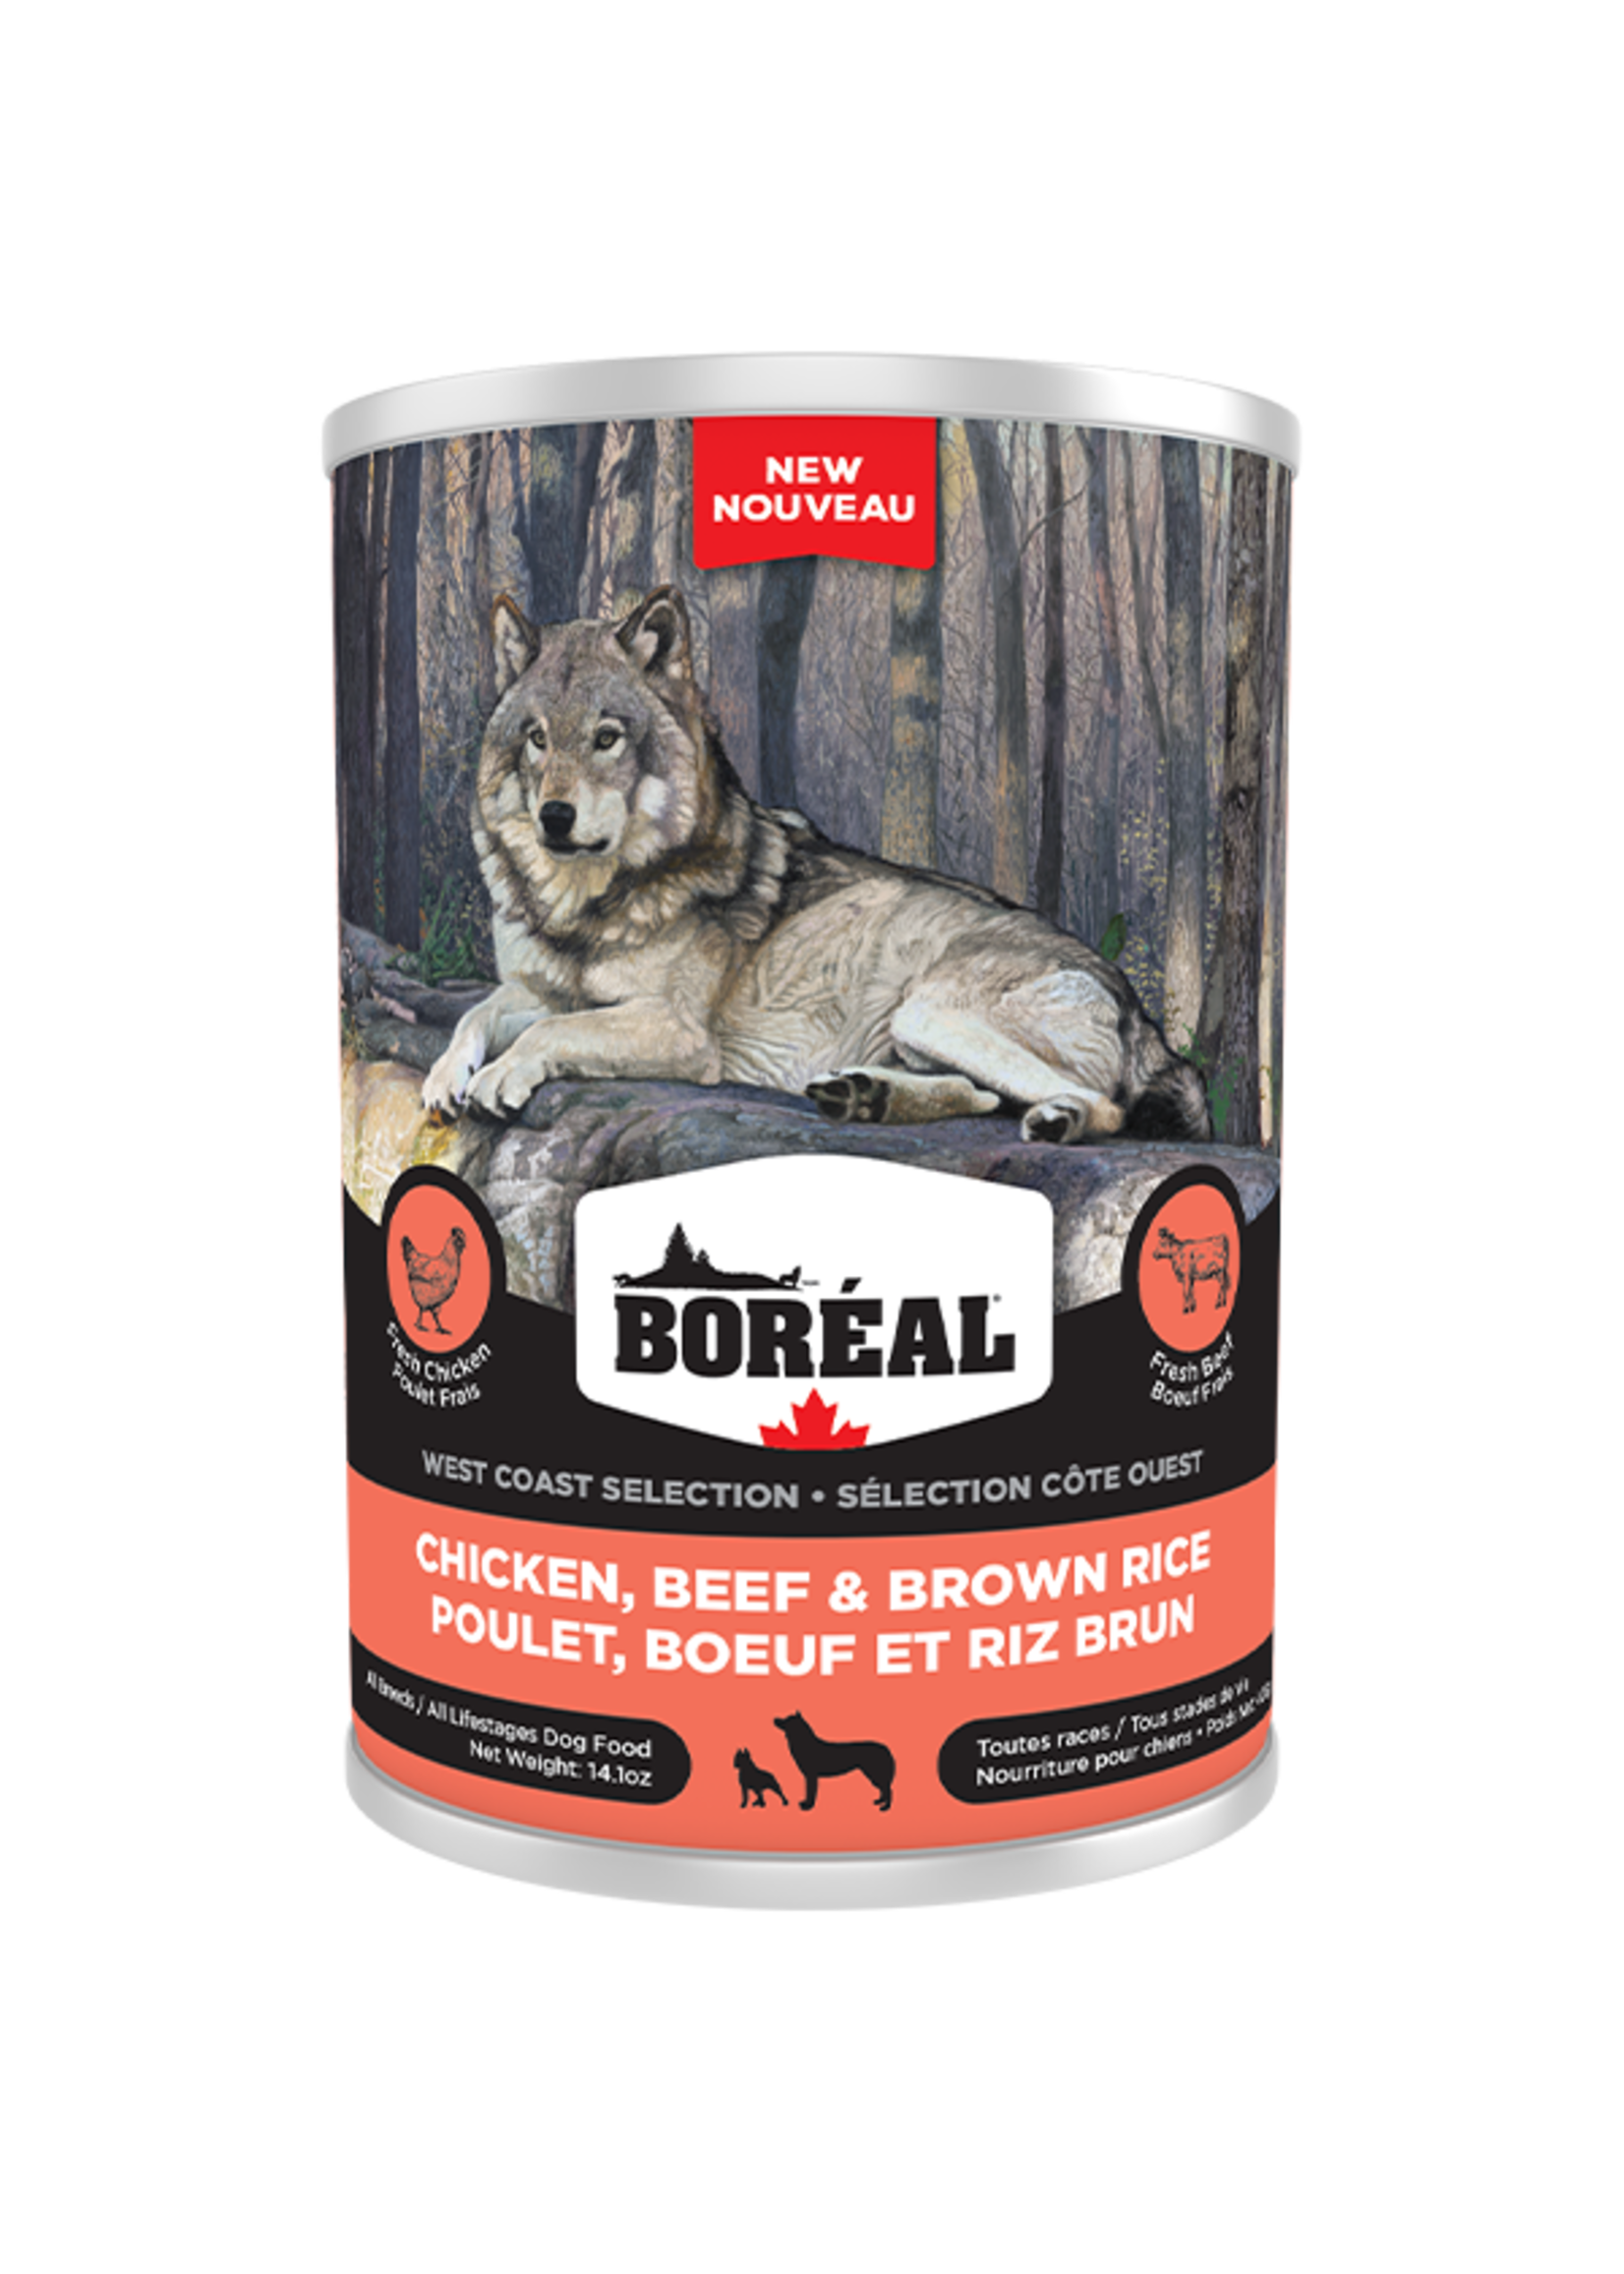 Boreal Boreal West Coast Dog - Chicken, Beef & Brown Rice Dog 400g